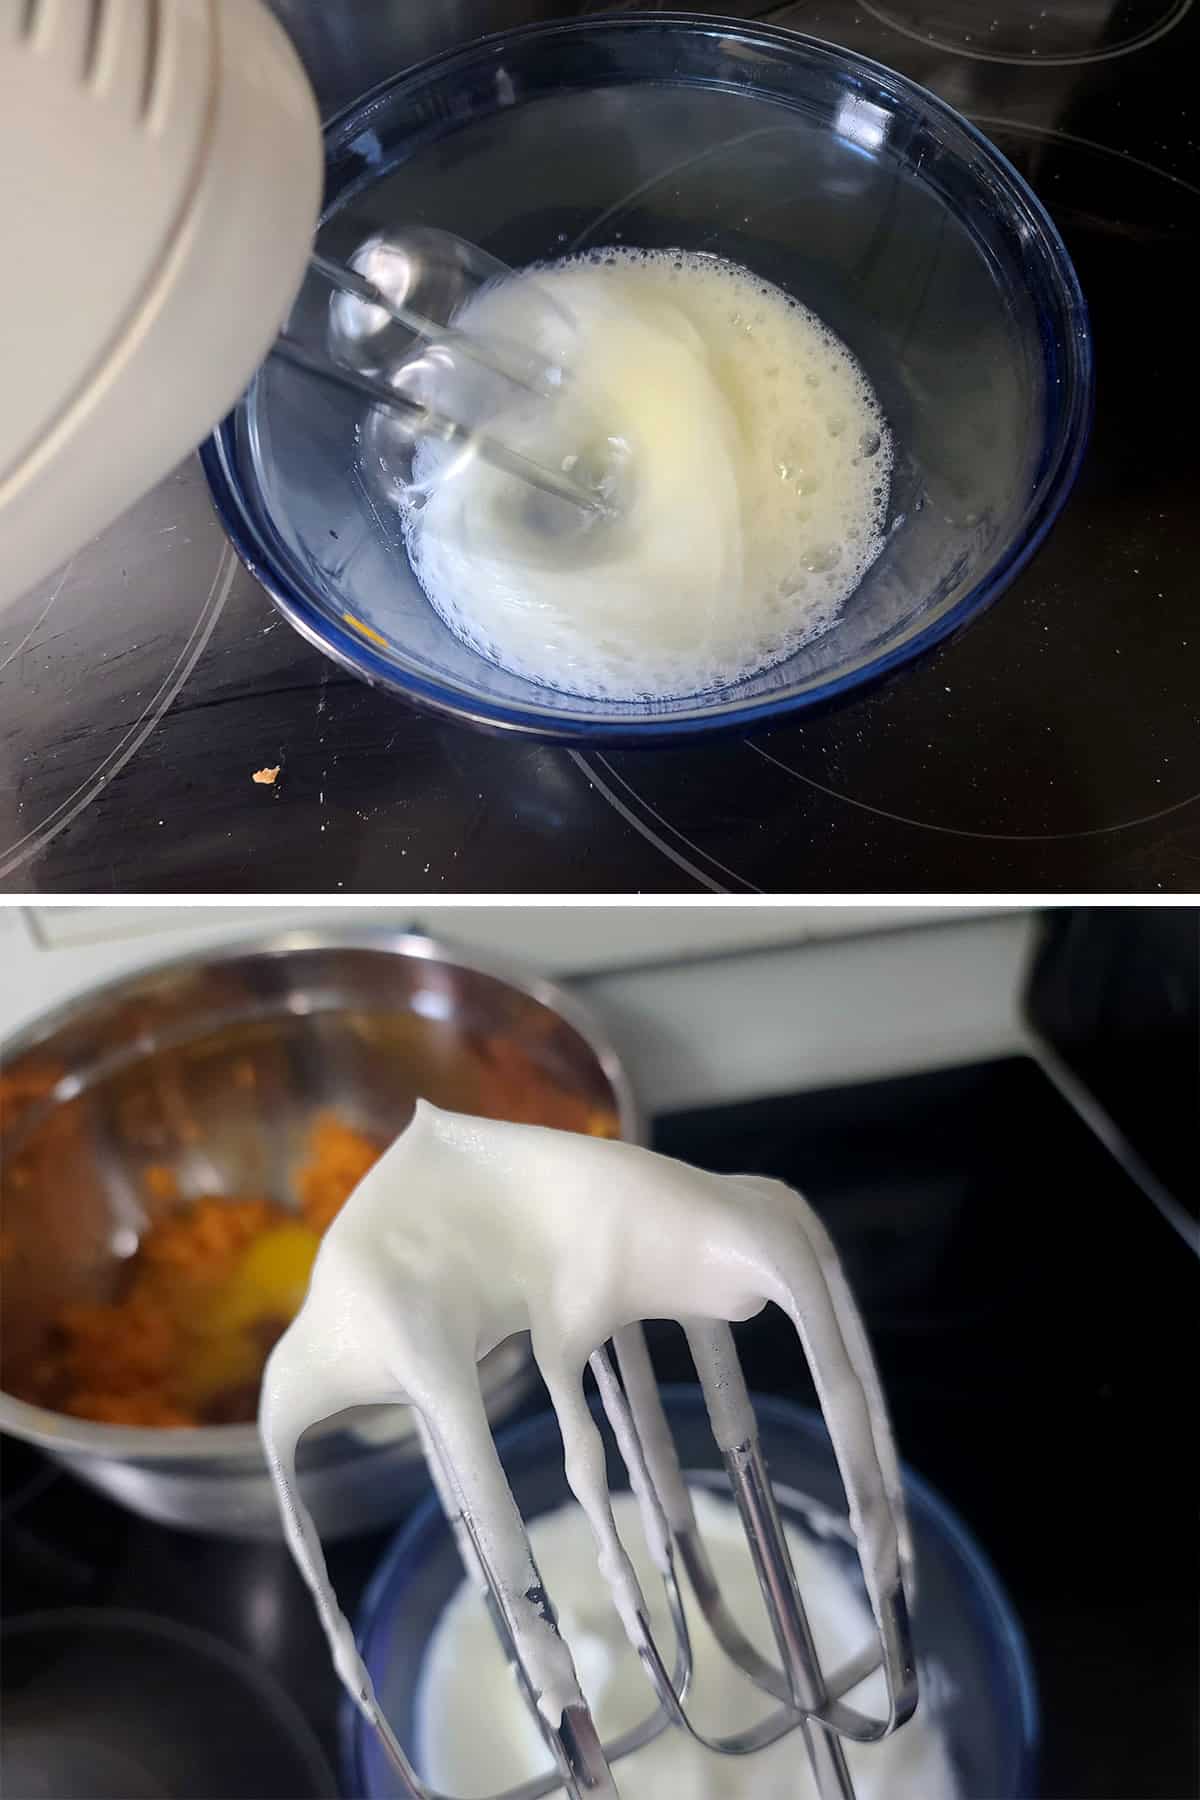 A 2 part image showing the egg whites being whipped.